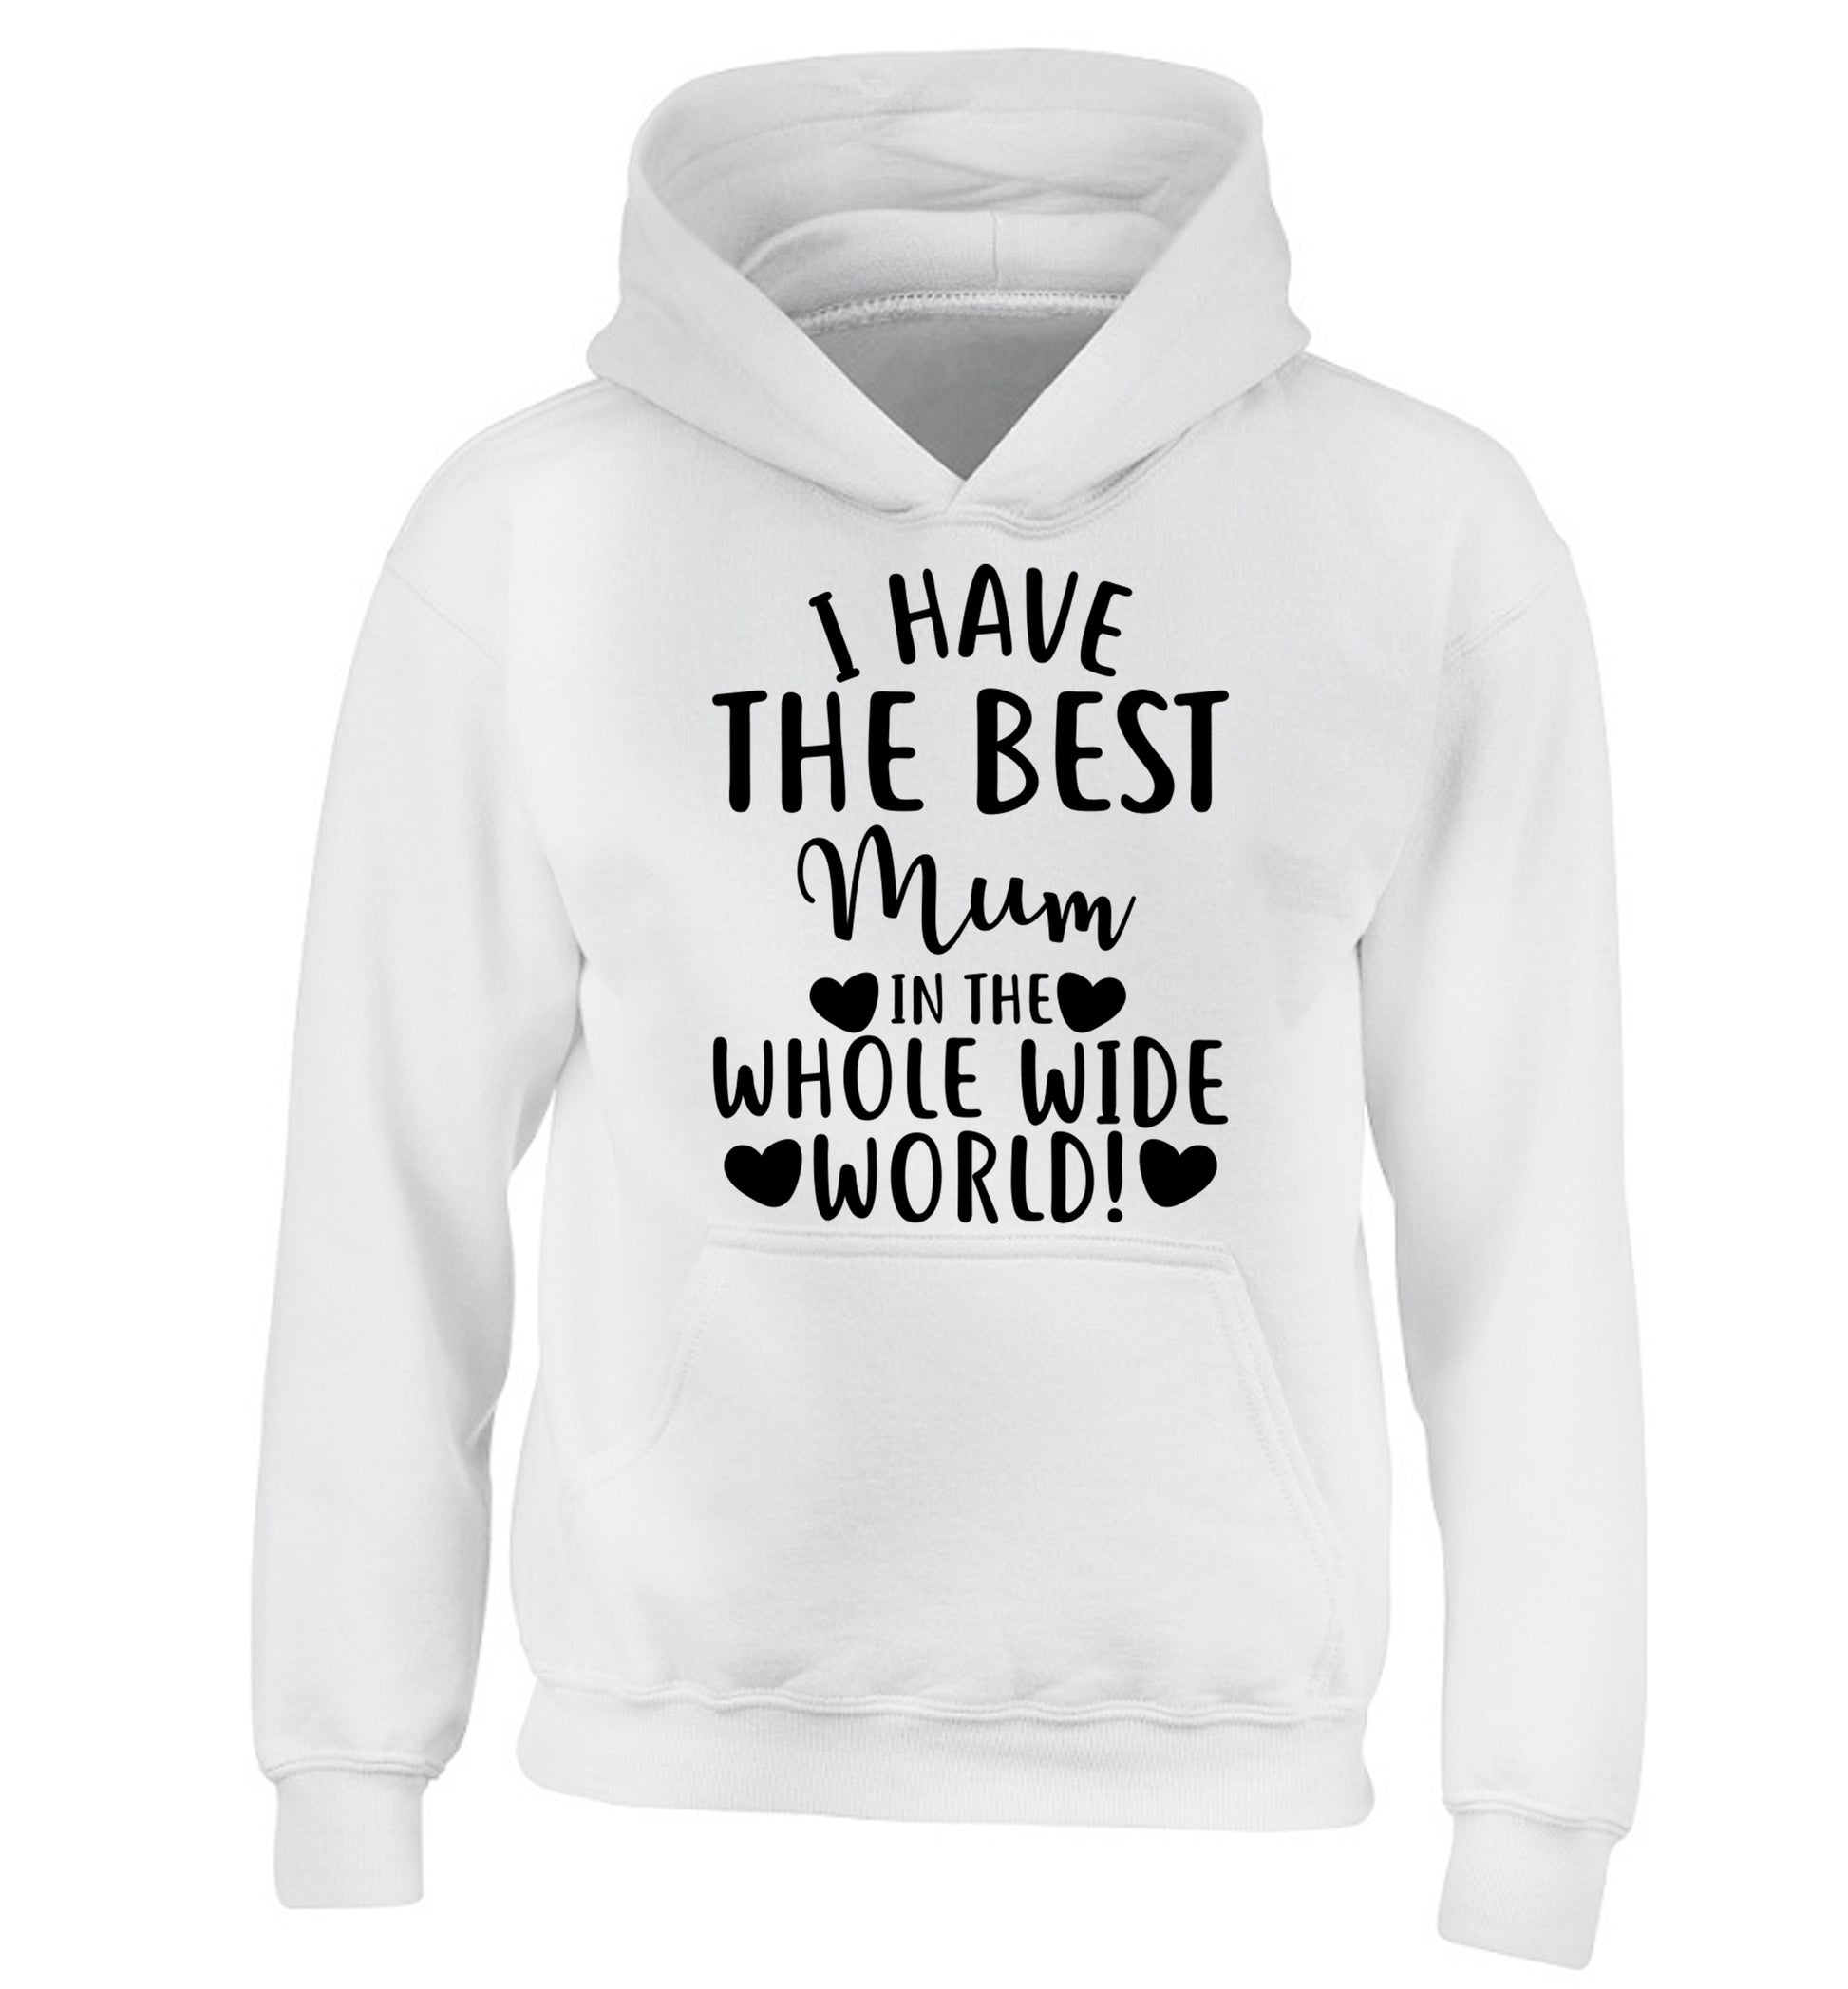 I have the best mum in the whole wide world! children's white hoodie 12-13 Years